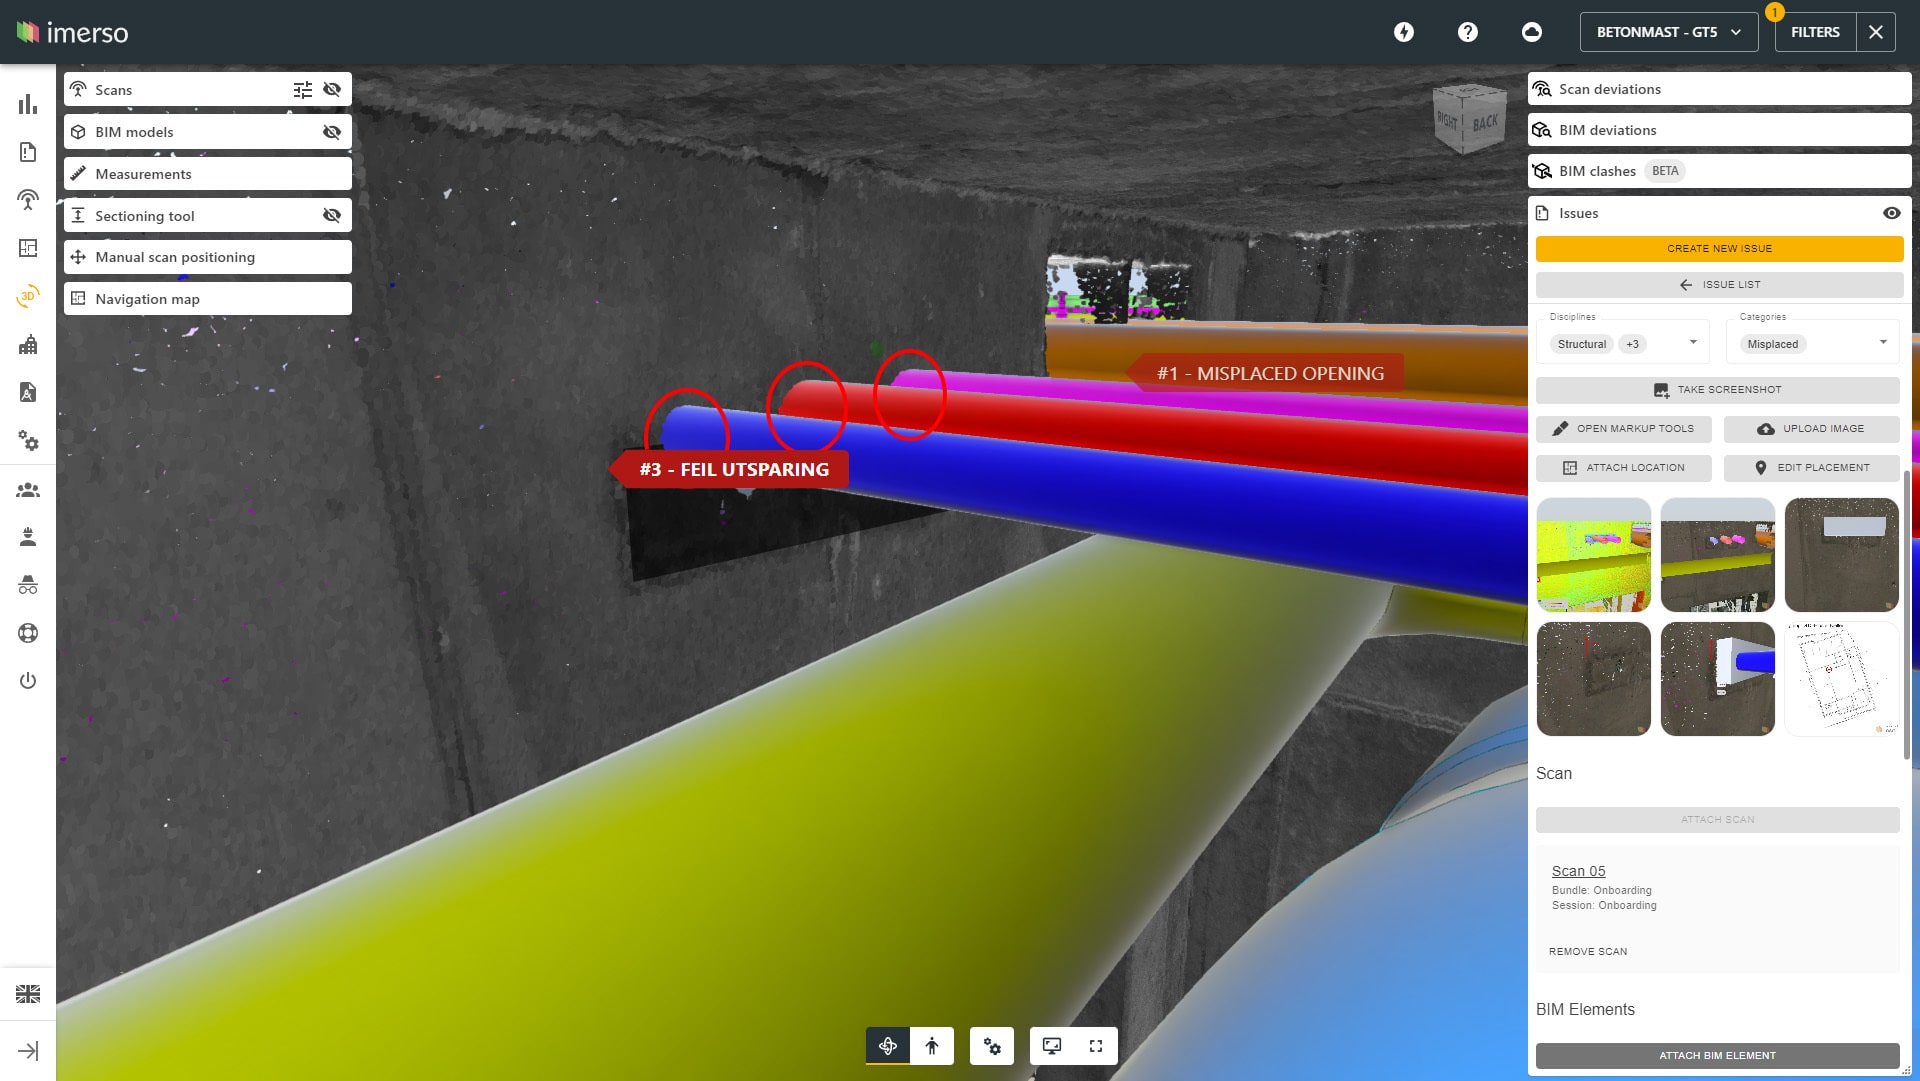 Betonmast shows how Imerso helps to detect deviations early to minimize construction costs